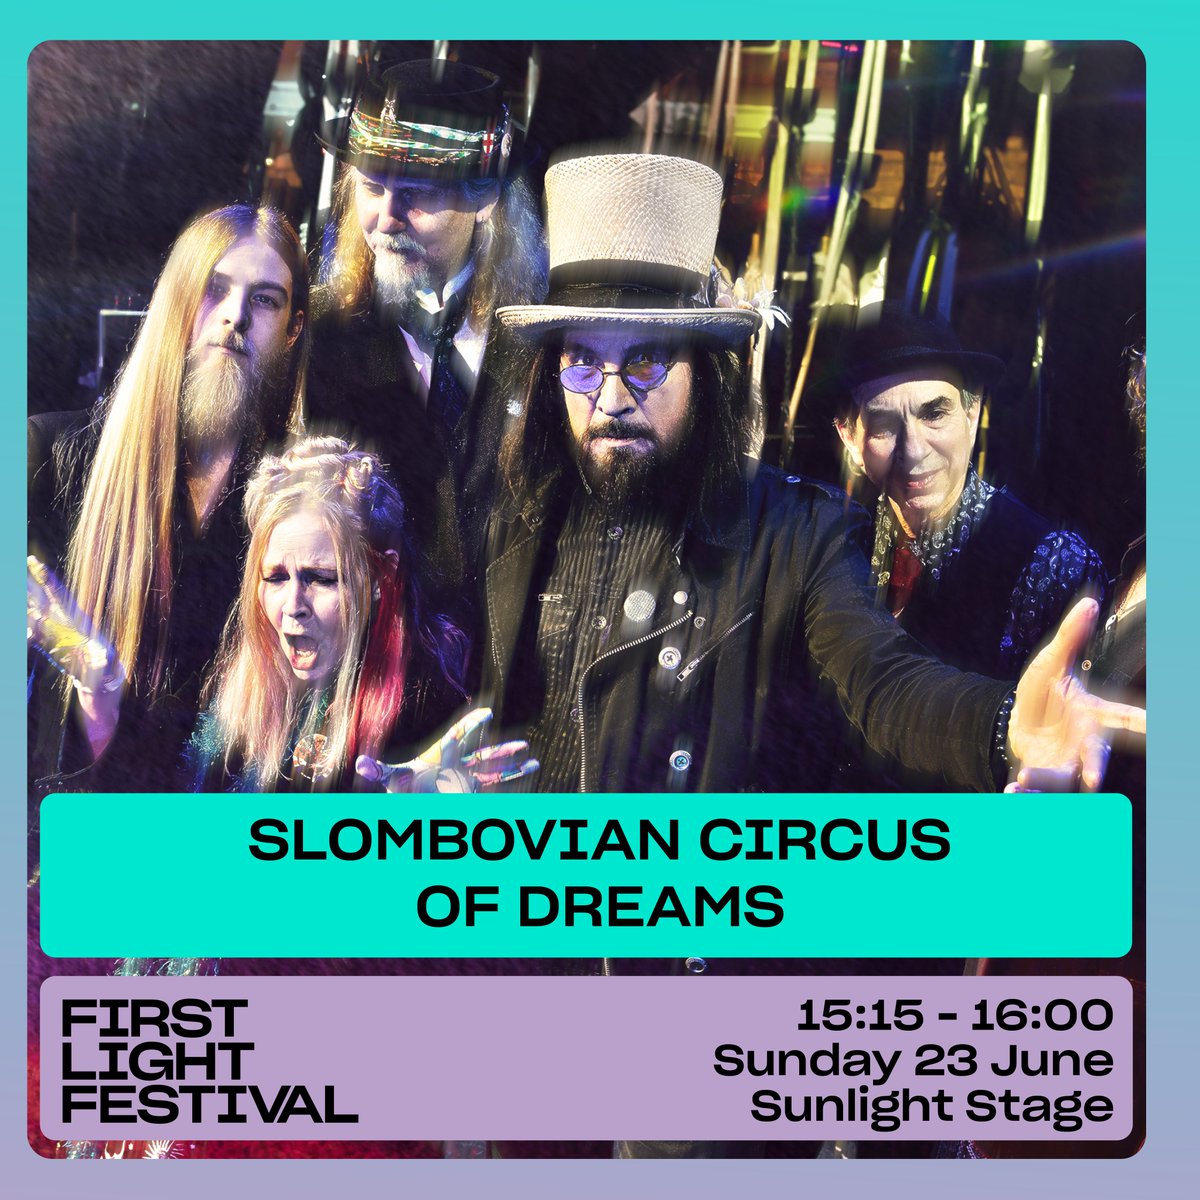 Bringing an irresistible slice of Americana pie to the shores of Lowestoft, @Slambovia will be closing out First Light Festival 2024 on the Sunlight Stage on Sunday 23 June! 🌅🎶 firstlightlowestoft.com/events-2024/sl… #FirstLightFestival2024 #Lowestoft